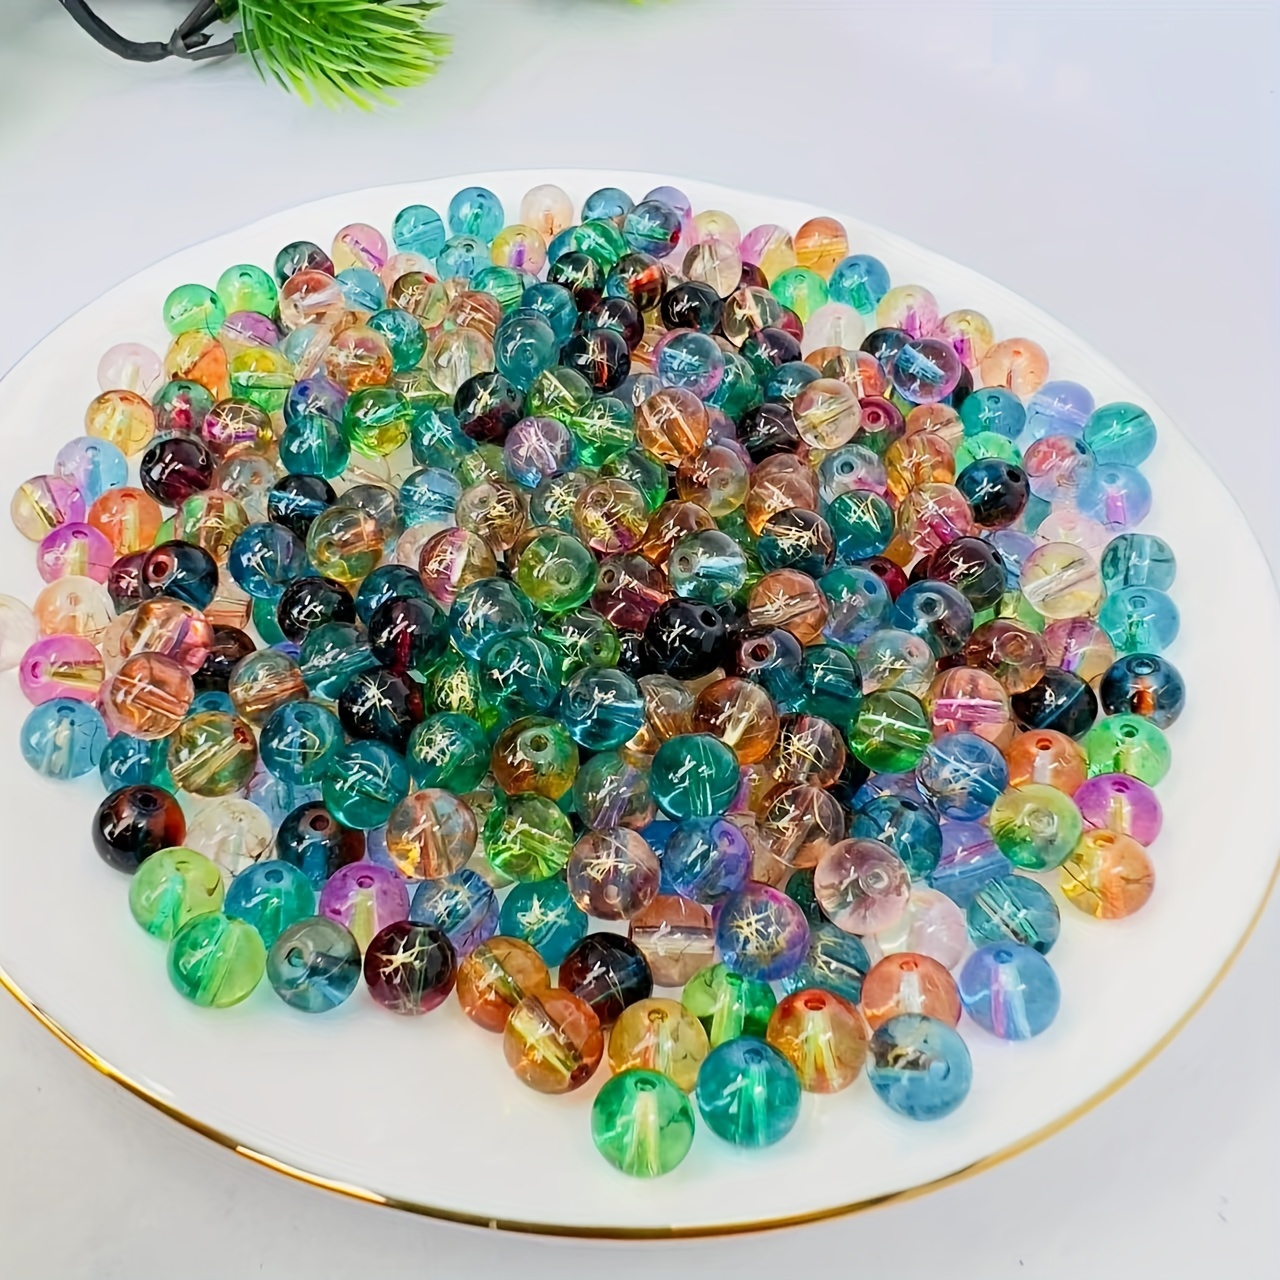 jweemax 84PCS 8mm Faceted Iridescent Beads, Loose Crystal Beads, Spacer  Beads for Bracelet, Necklace, Jewelry Making